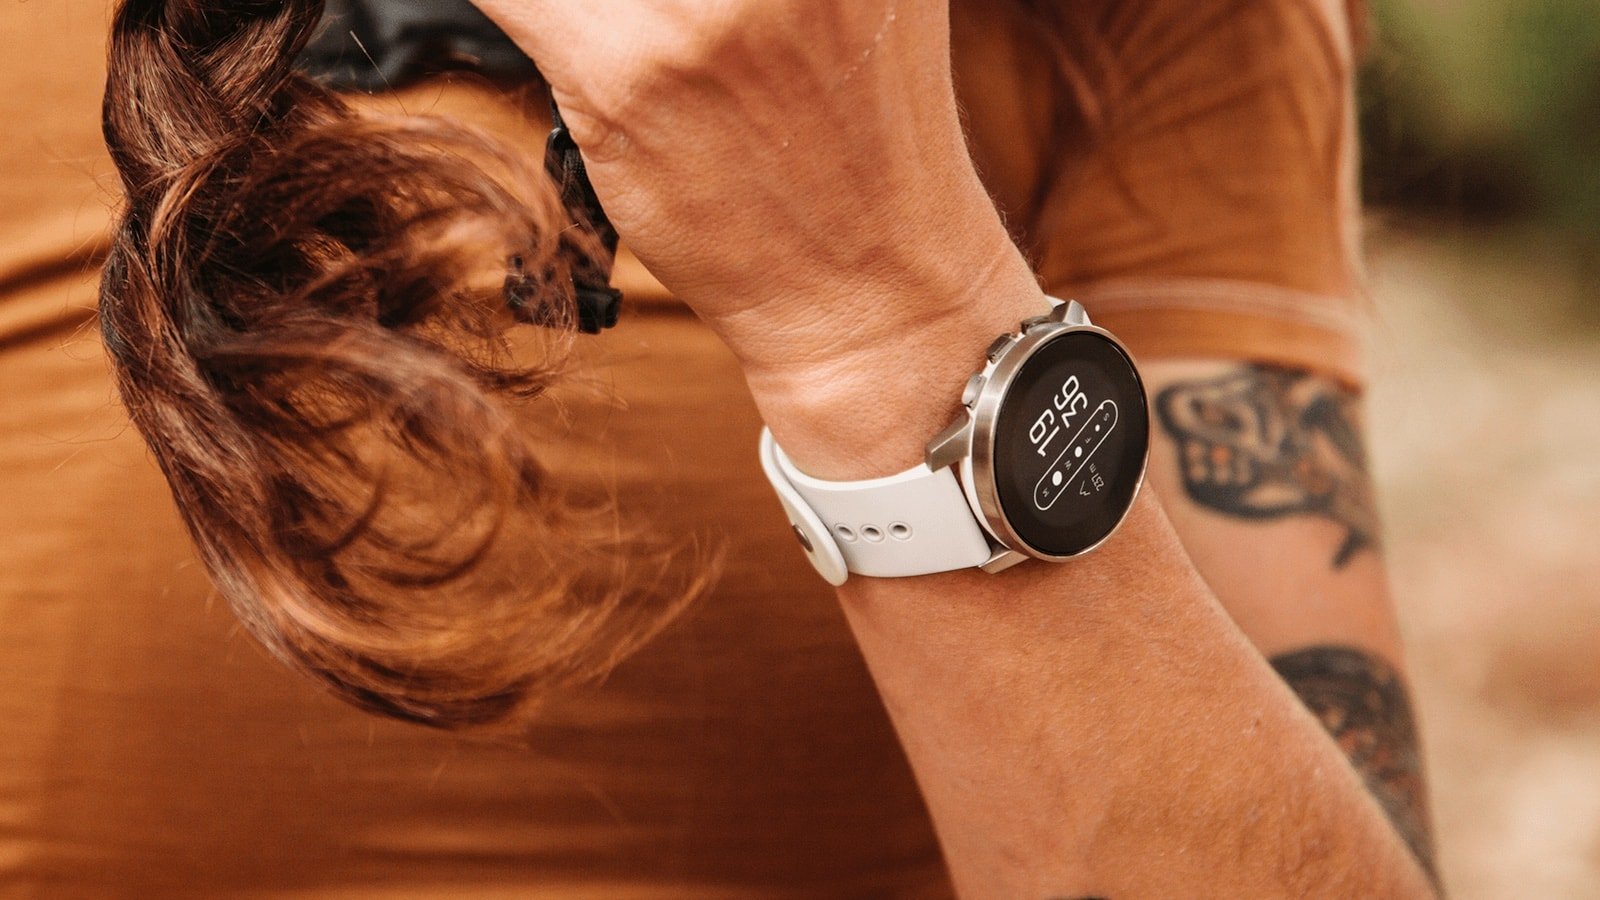 Suunto 9 Peak GPS watch features grade 5 titanium for lighter weight and comfortable wear